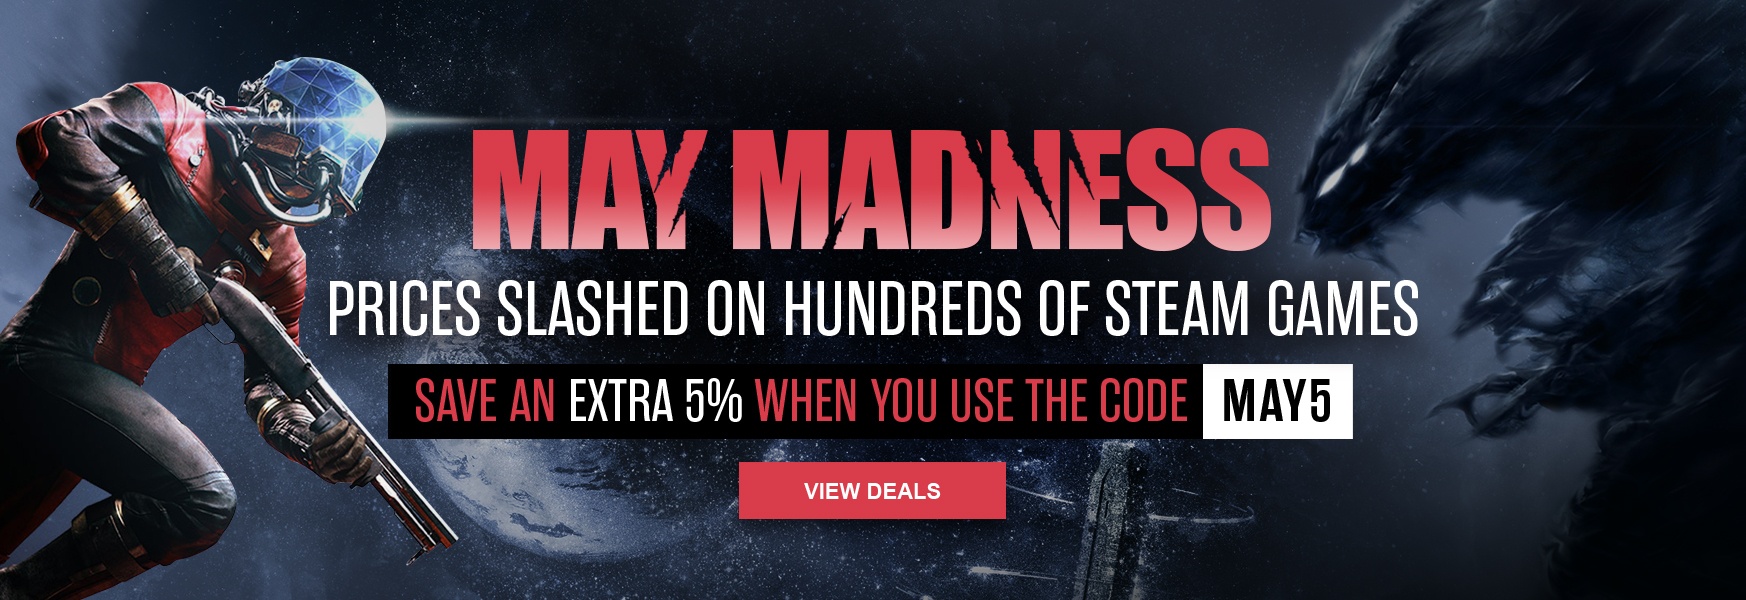 May Madness Game Deals